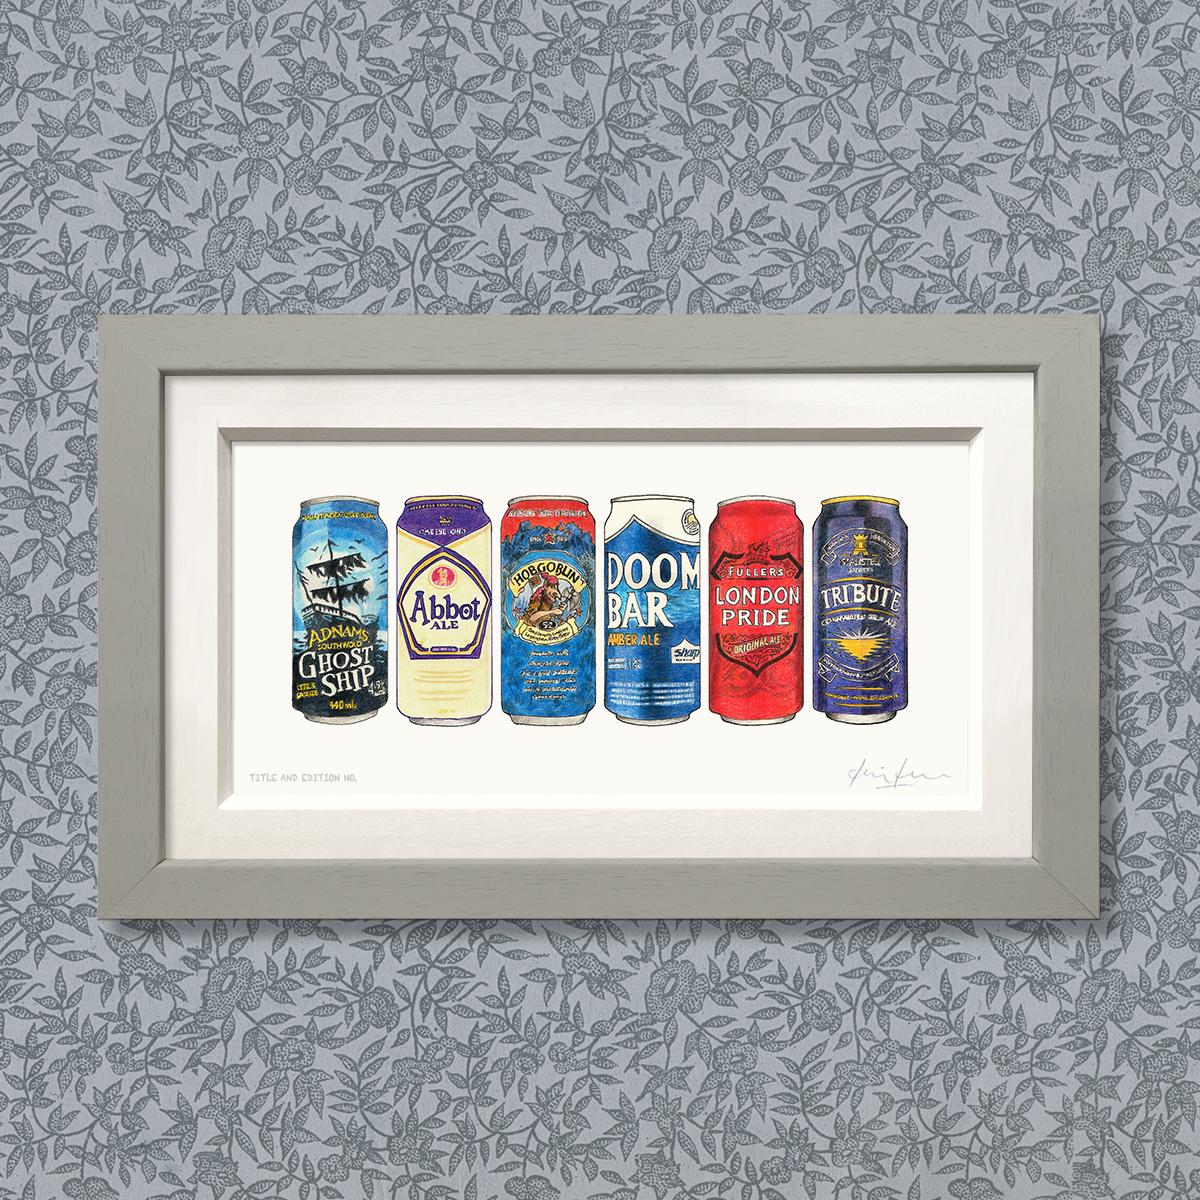 Sample Six Pack in a grey frame.